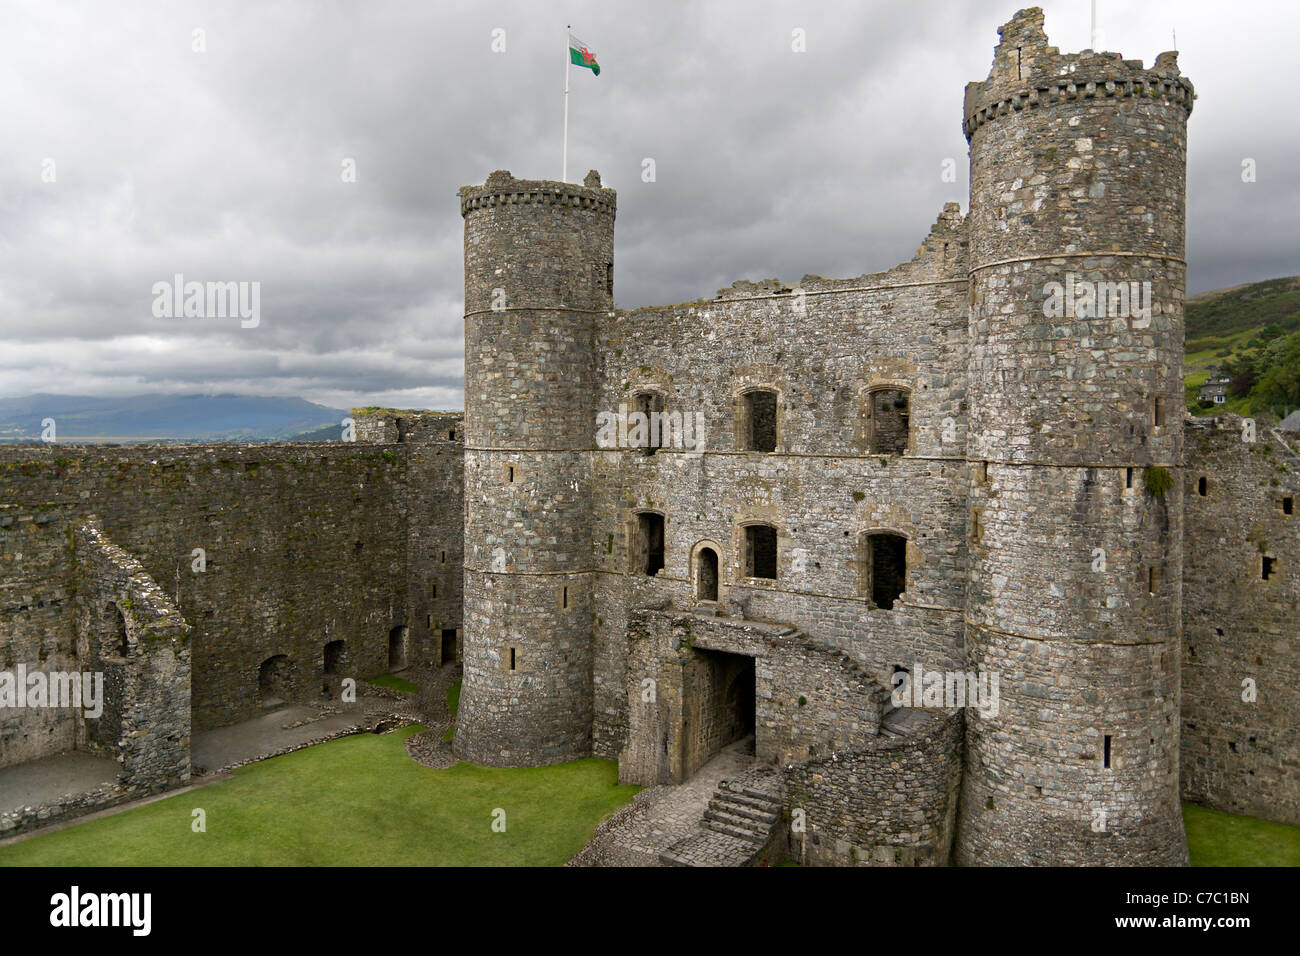 Medieval castle at Harlech, Wales Stock Photo